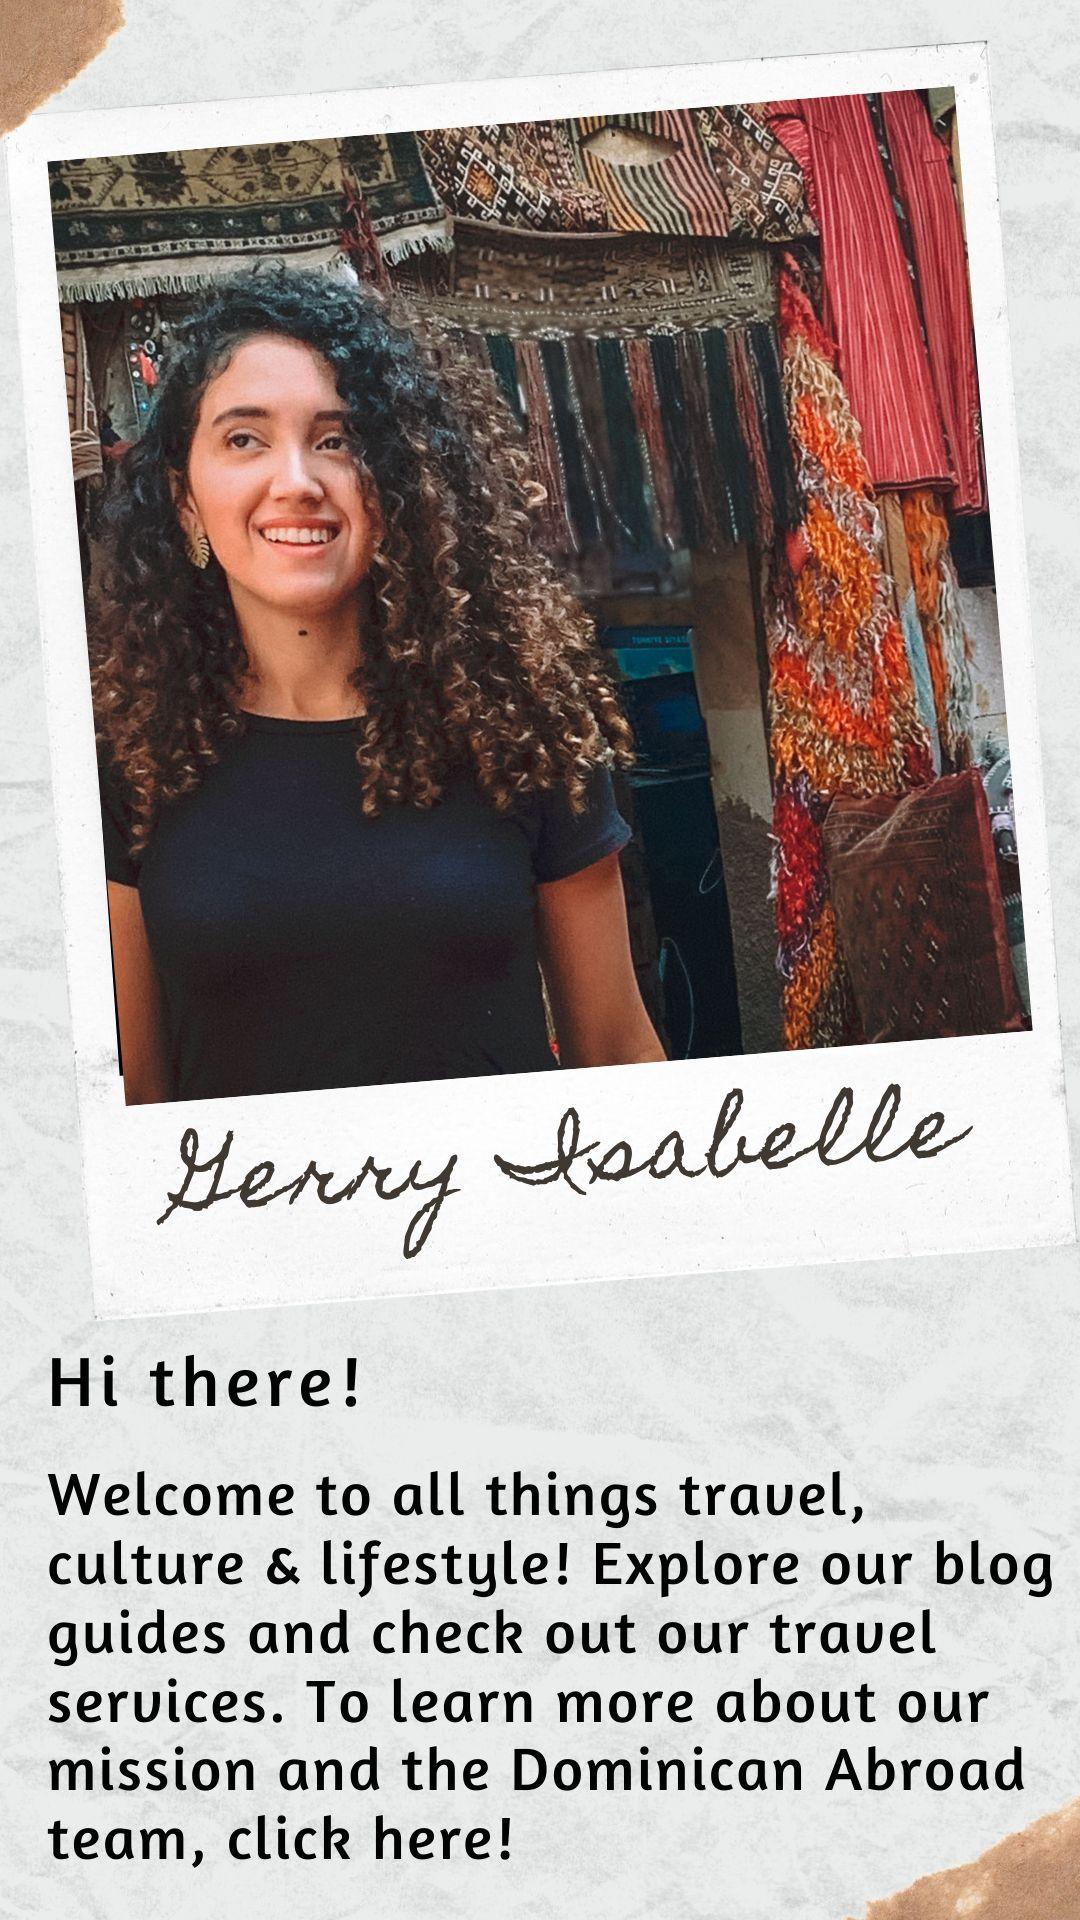 Hi There! Welcome to all things travel, culture & lifestyle! Explore our blog guides and check out our travel services. To learn more about our mission and the Dominican Abroad team, click here!